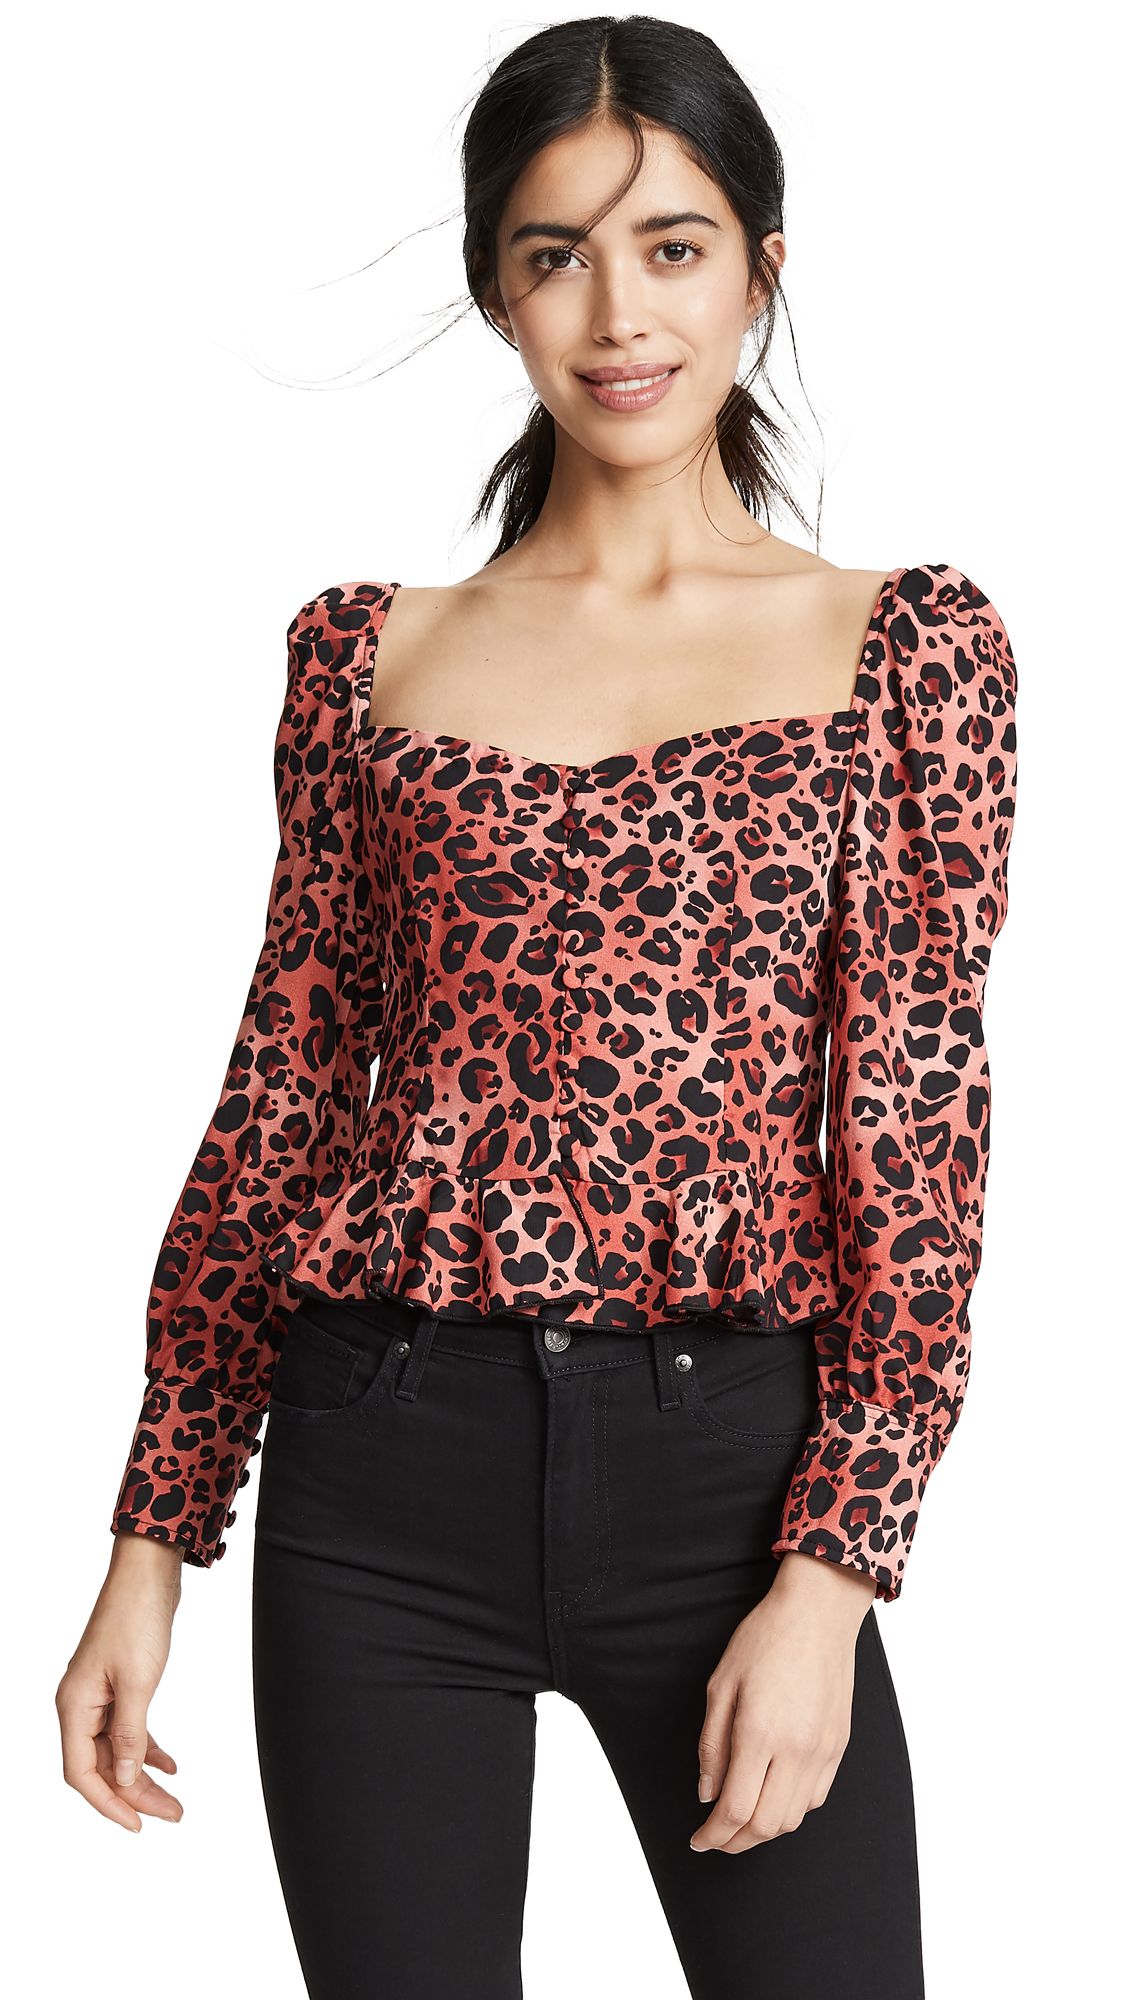 Lioness Sweethearts Top | Shopbop